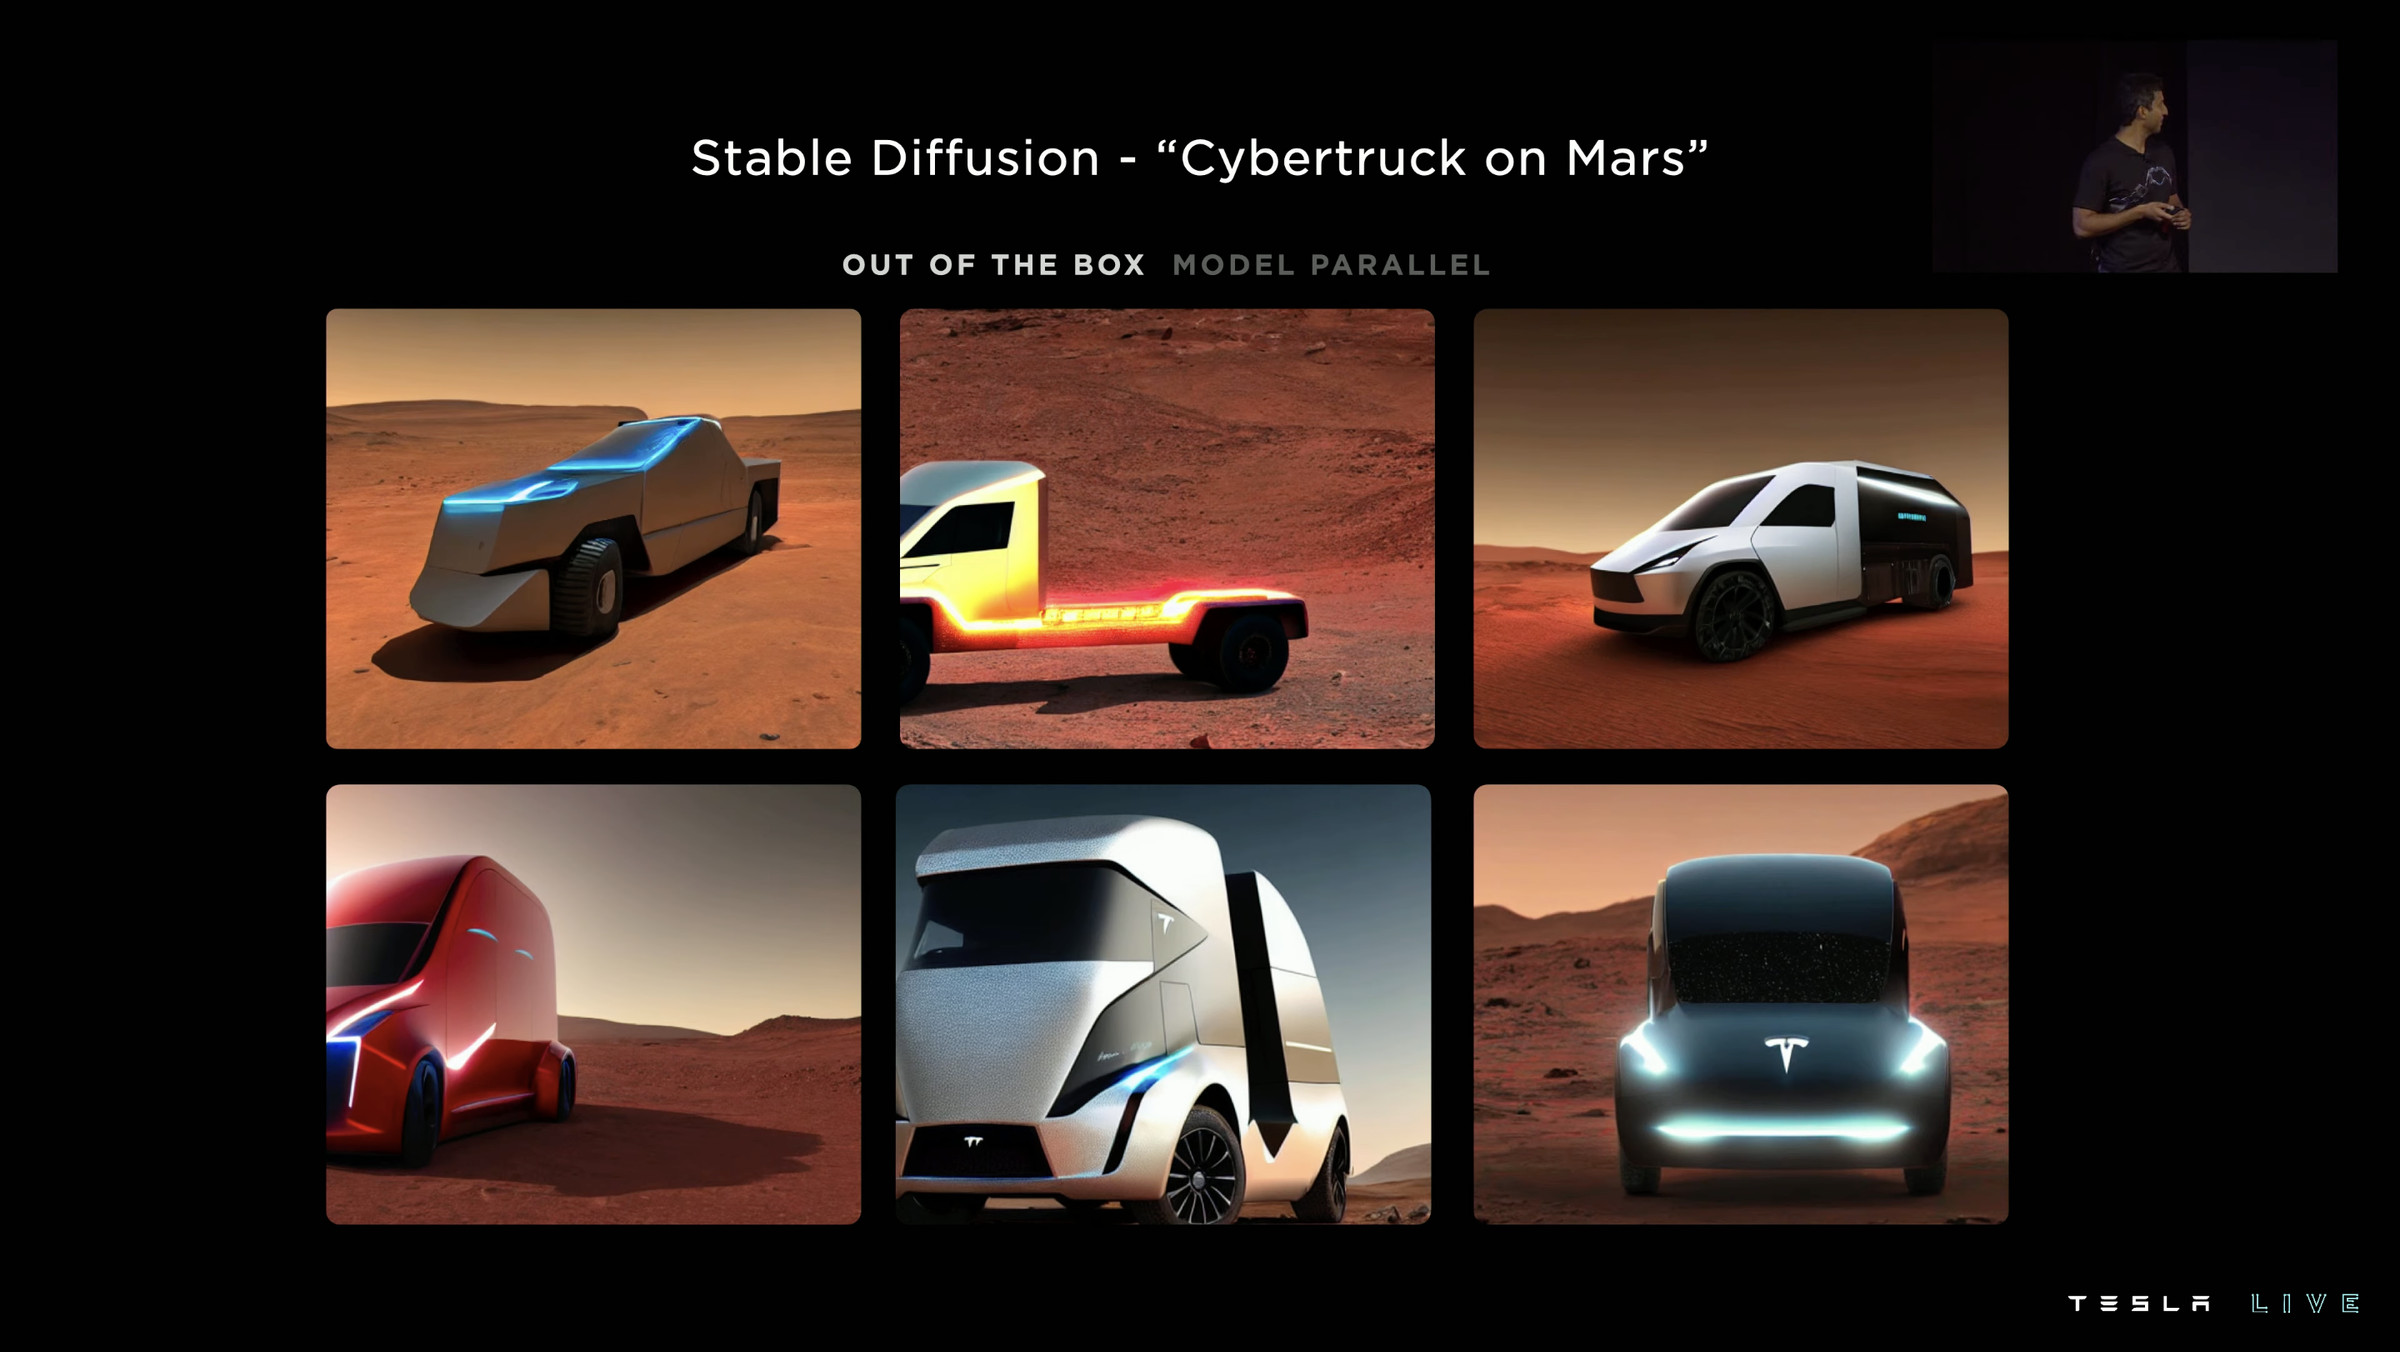 Stable Diffusion AI model for “Cybertruck on Mars” processed on Dojo.